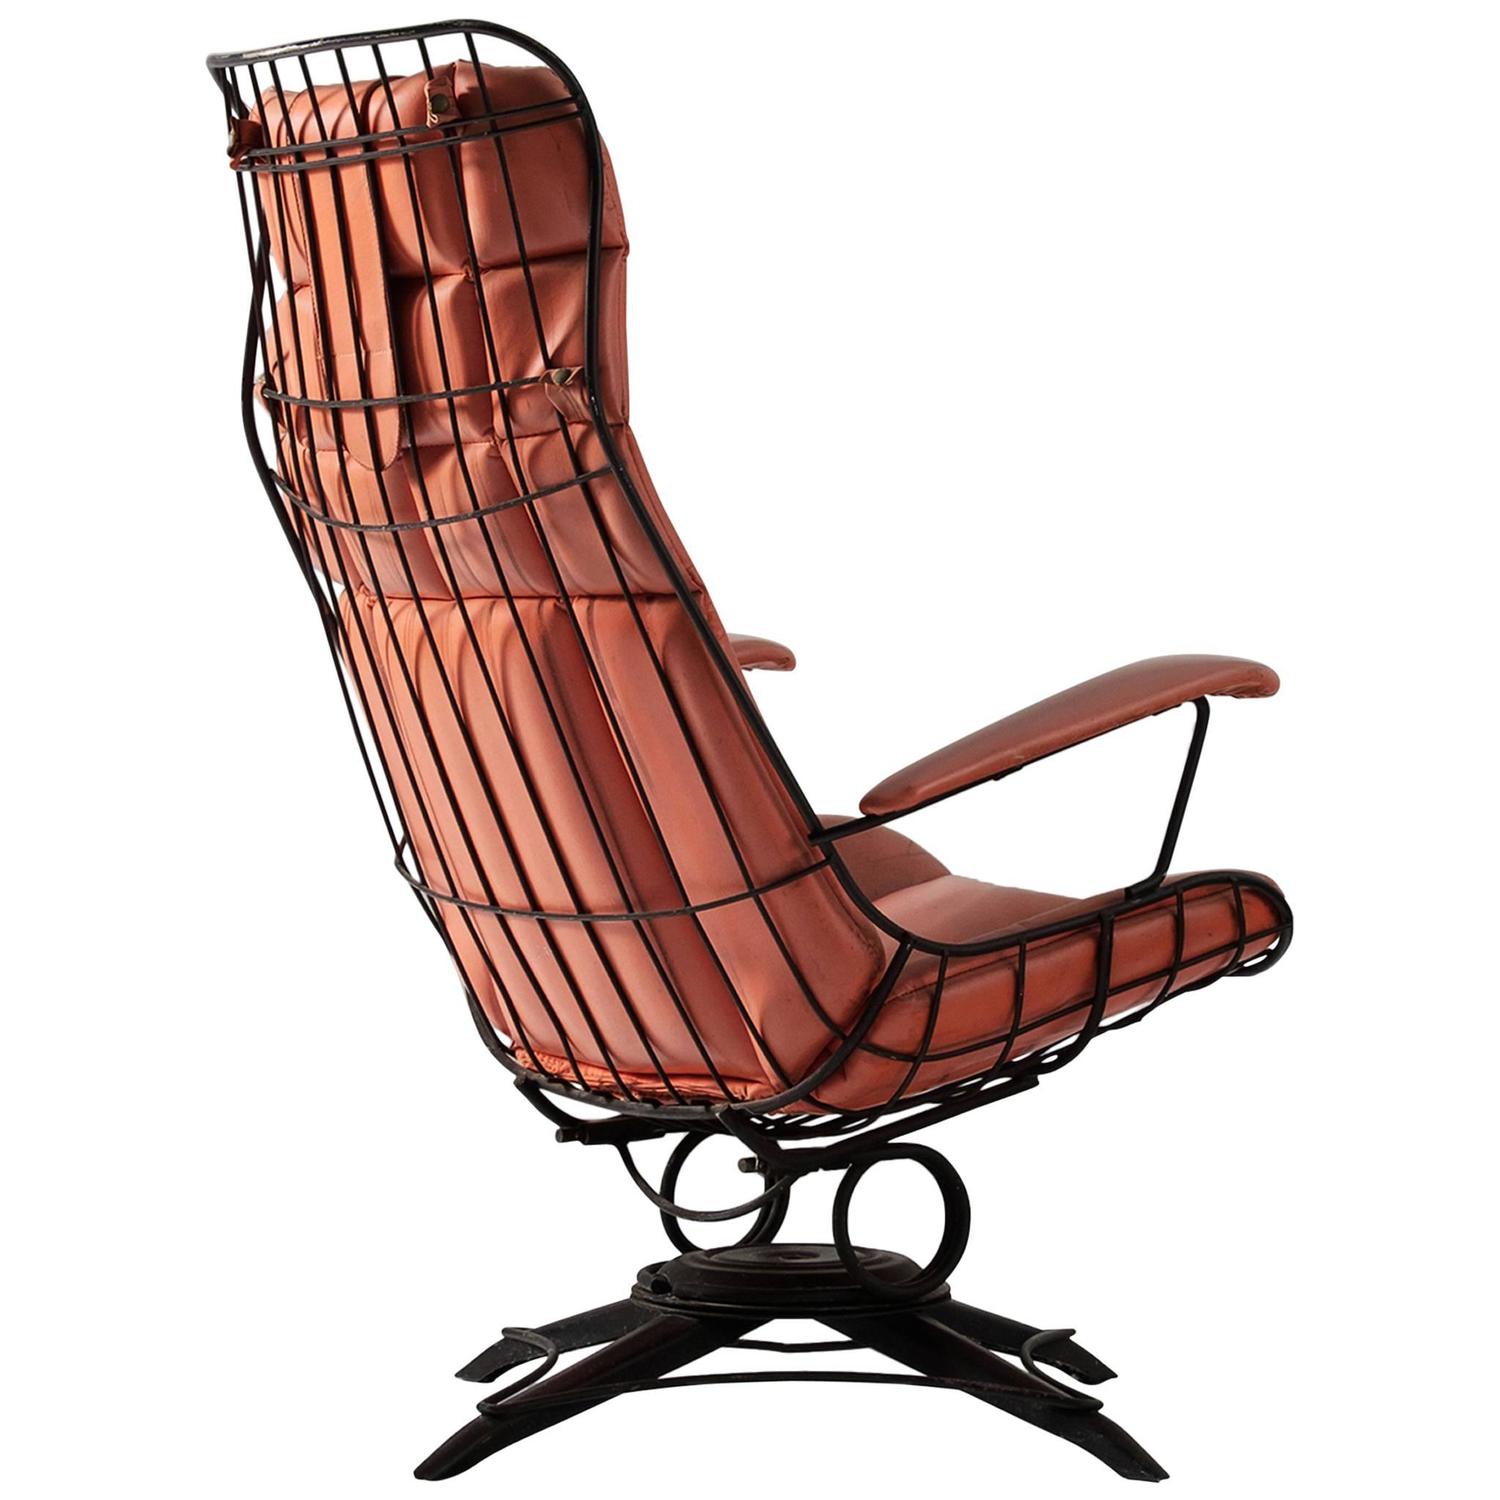 Black Wire Metal Rocking Chair For Sale at 1stdibs